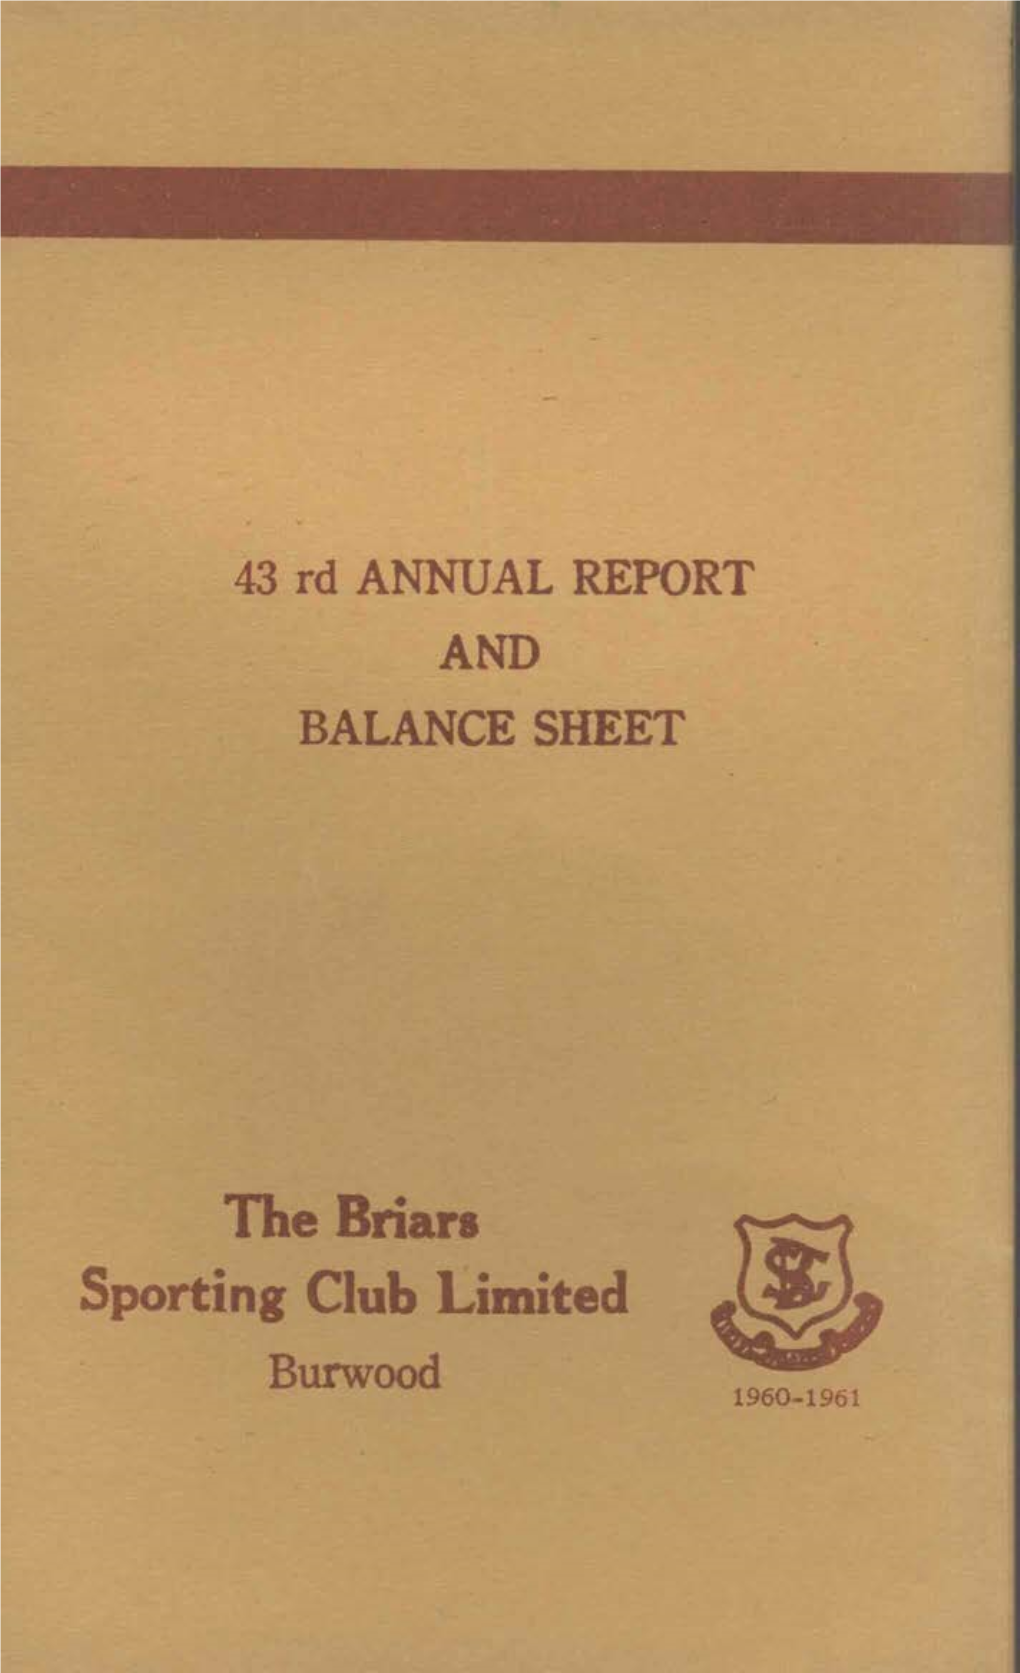 The Briars Sporting Club Limited Annual Reports 1960-61